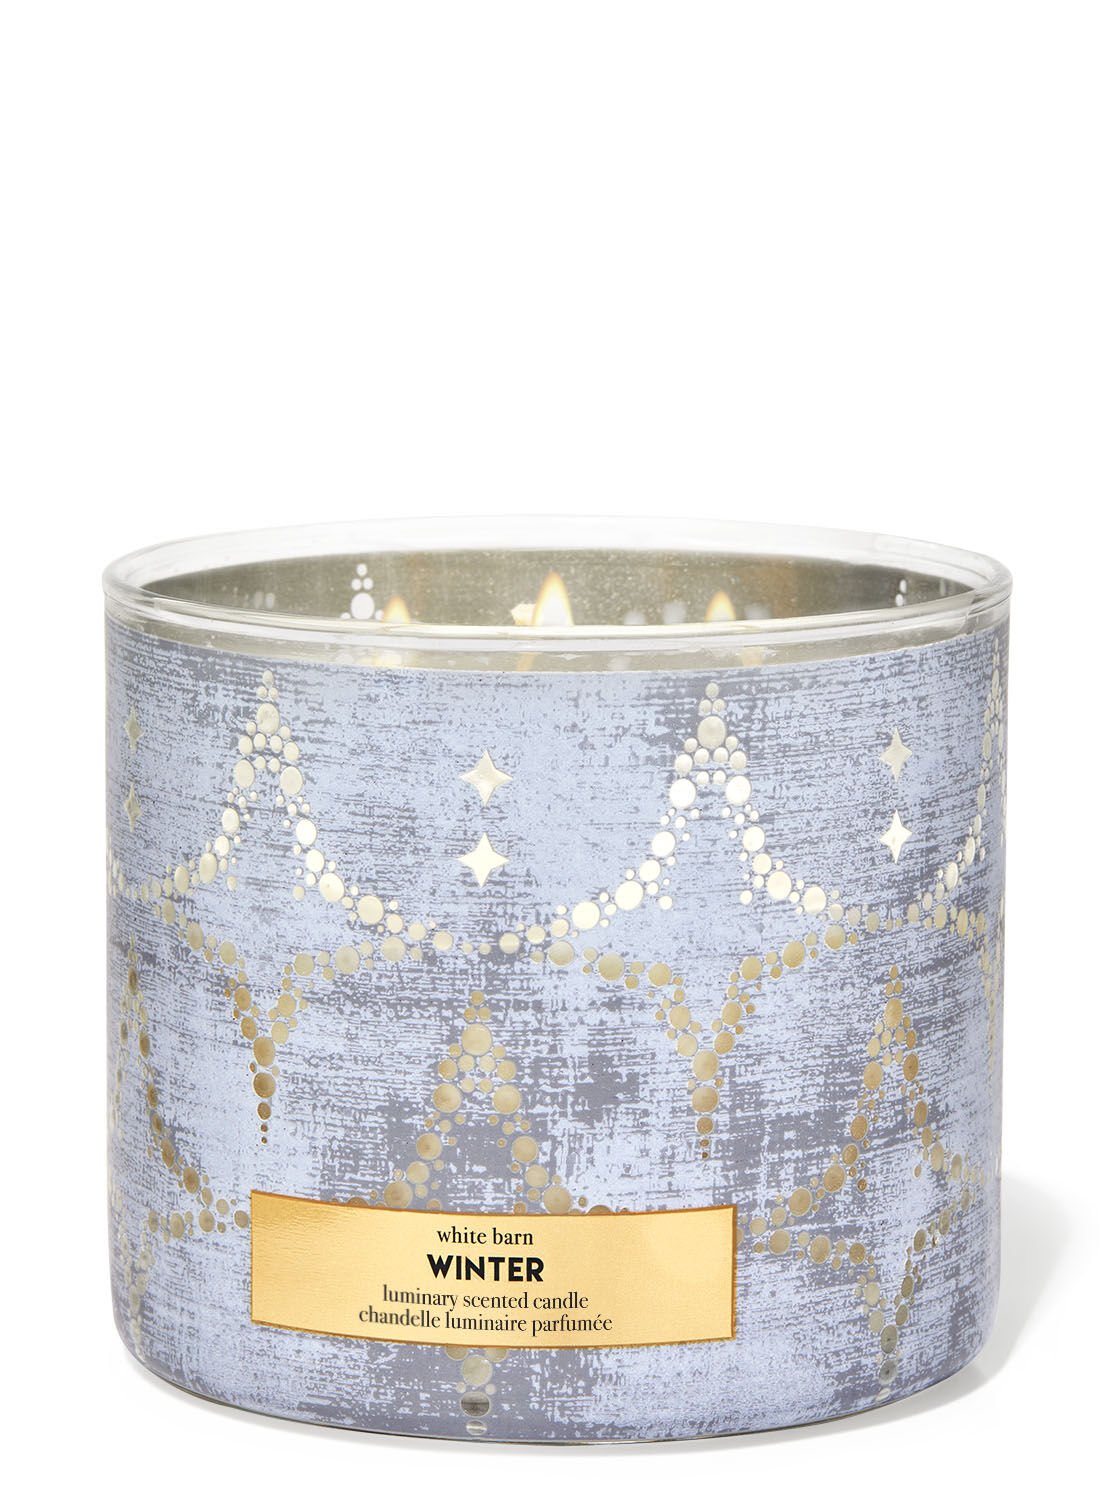 1 Bath & Body Works WINTER Large 3-Wick Candle 14.5 oz 